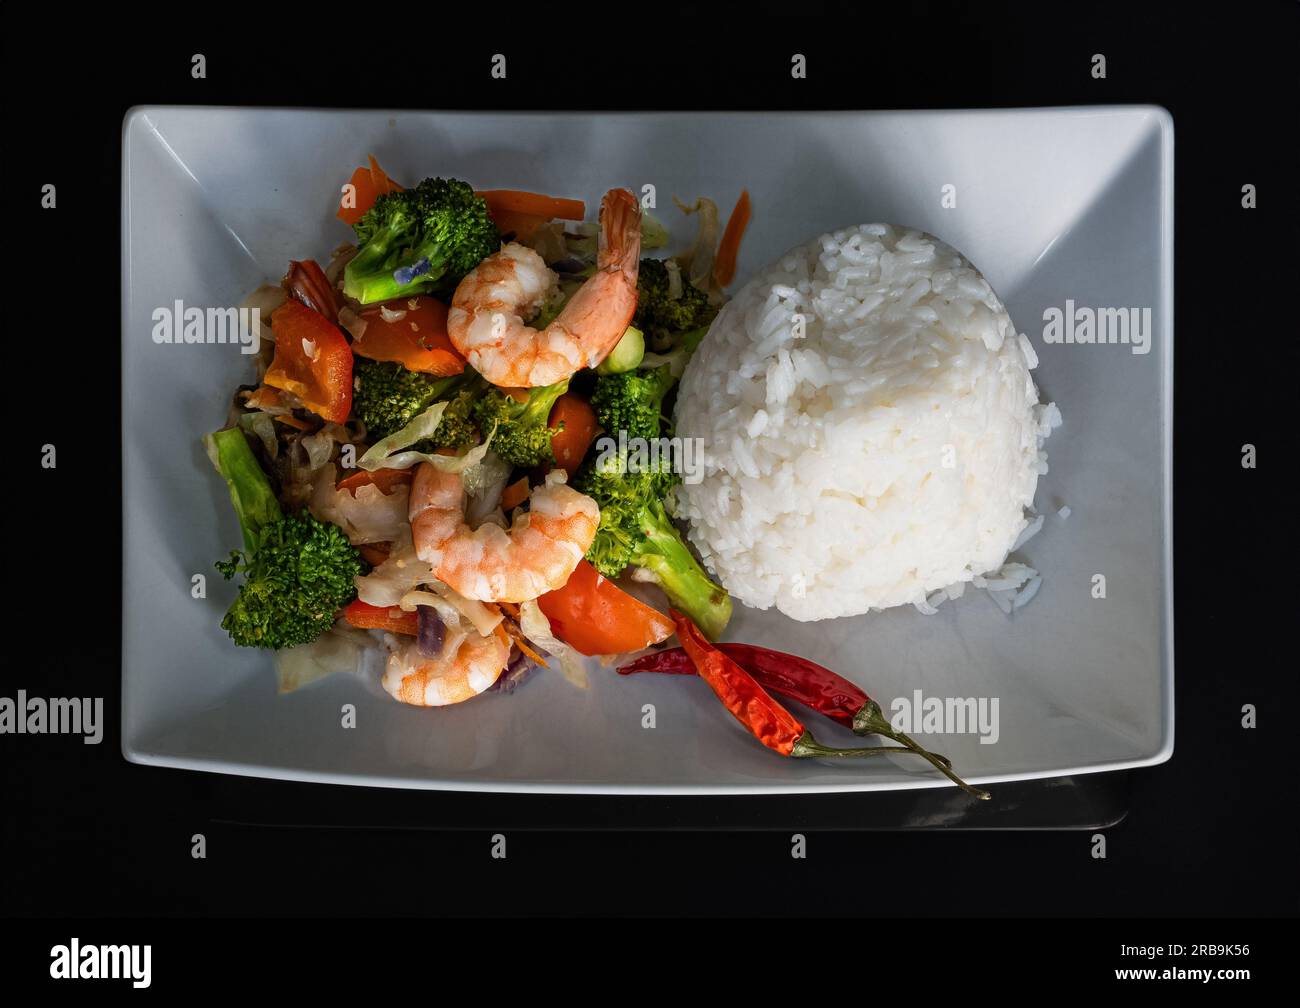 On a striking black background, a white plate showcases a delightful, colorful, and healthy stir fry seafood dish. The exquisite combination of rice, Stock Photo